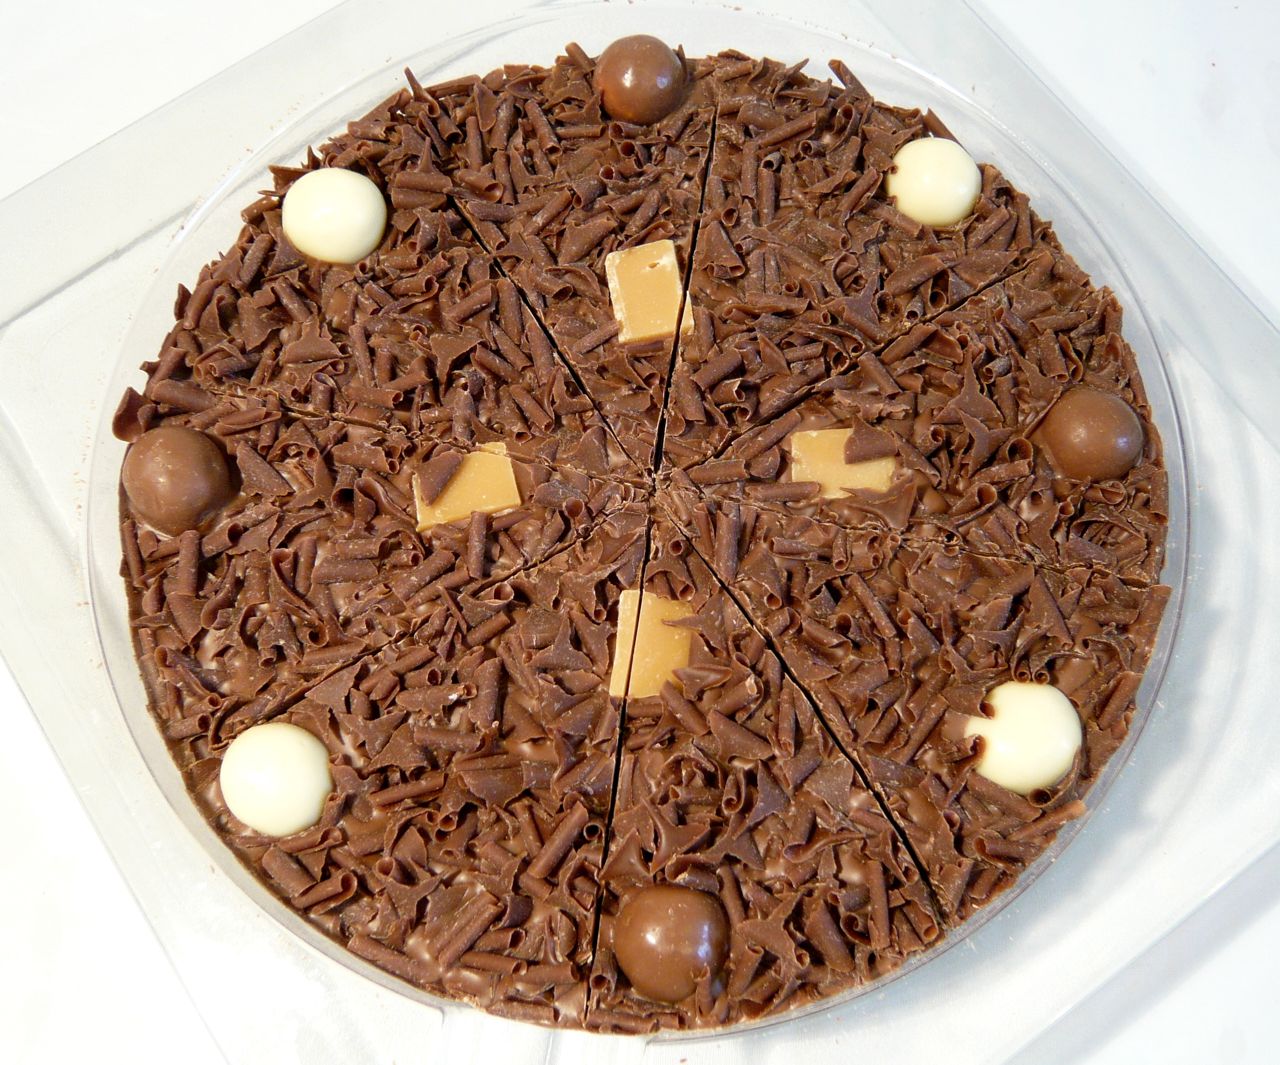 The Gourmet Chocolate Pizza Company